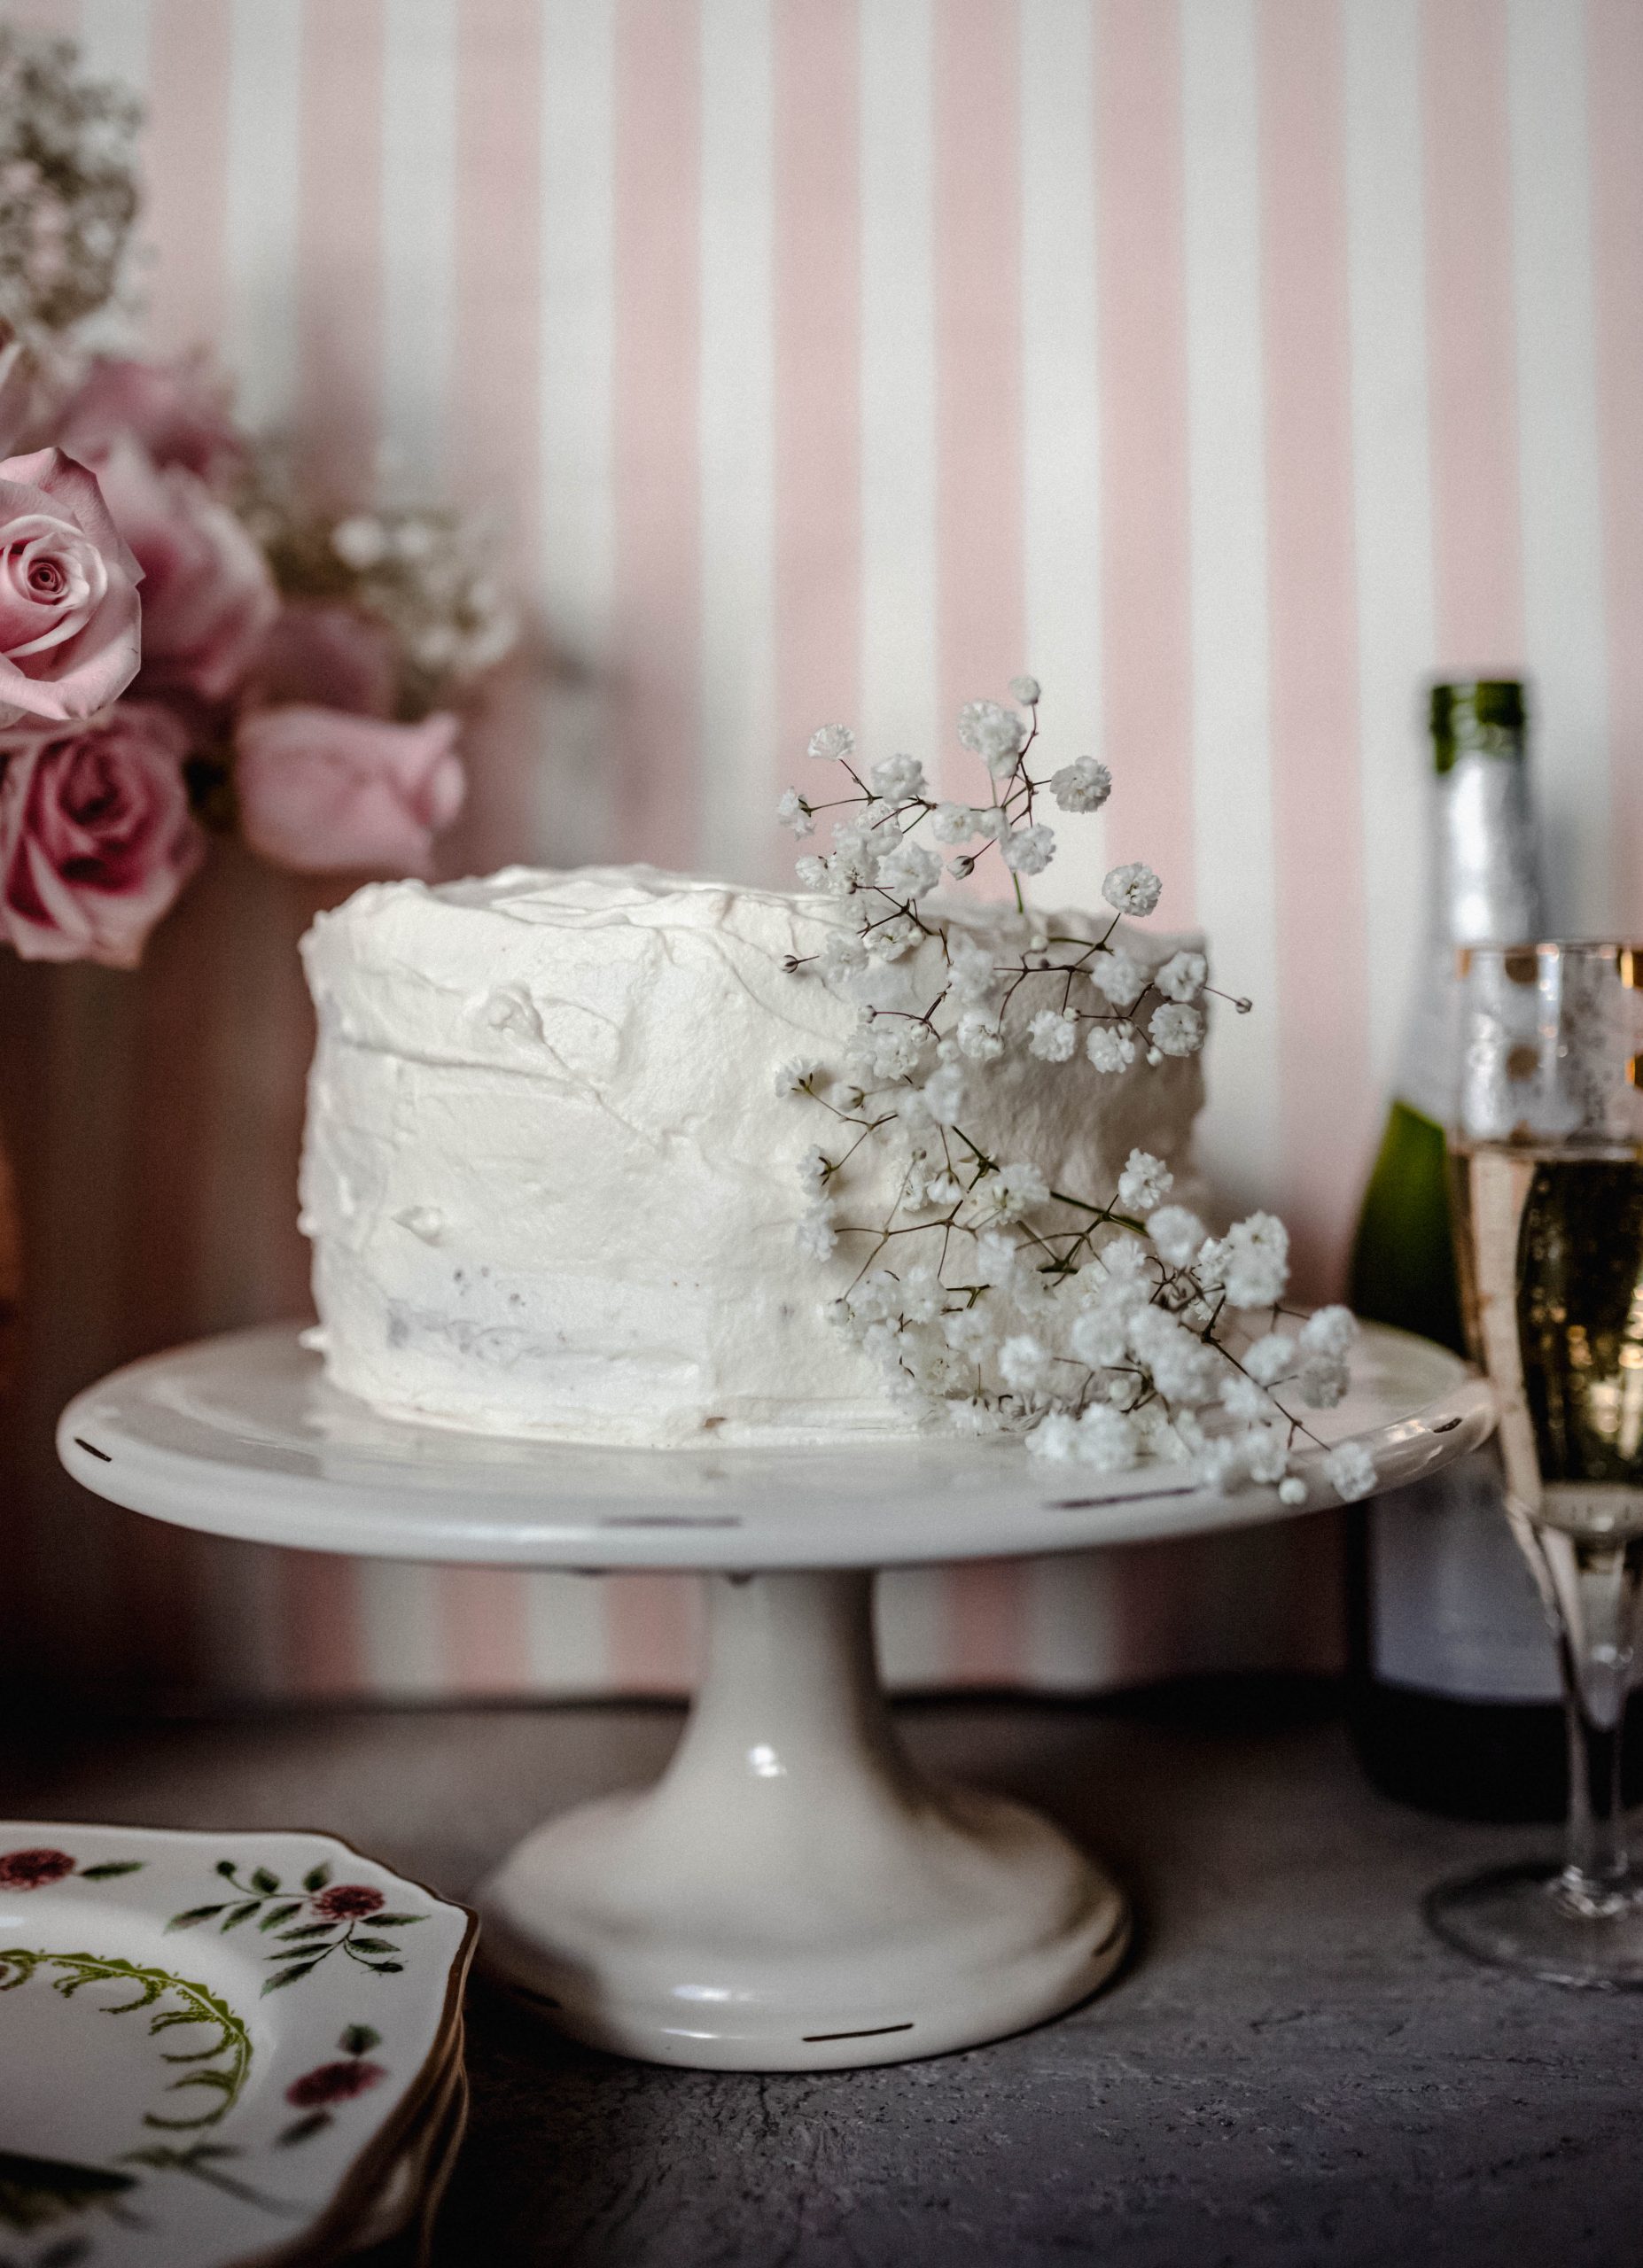 How to make a simple champagne layer cake with custard filling